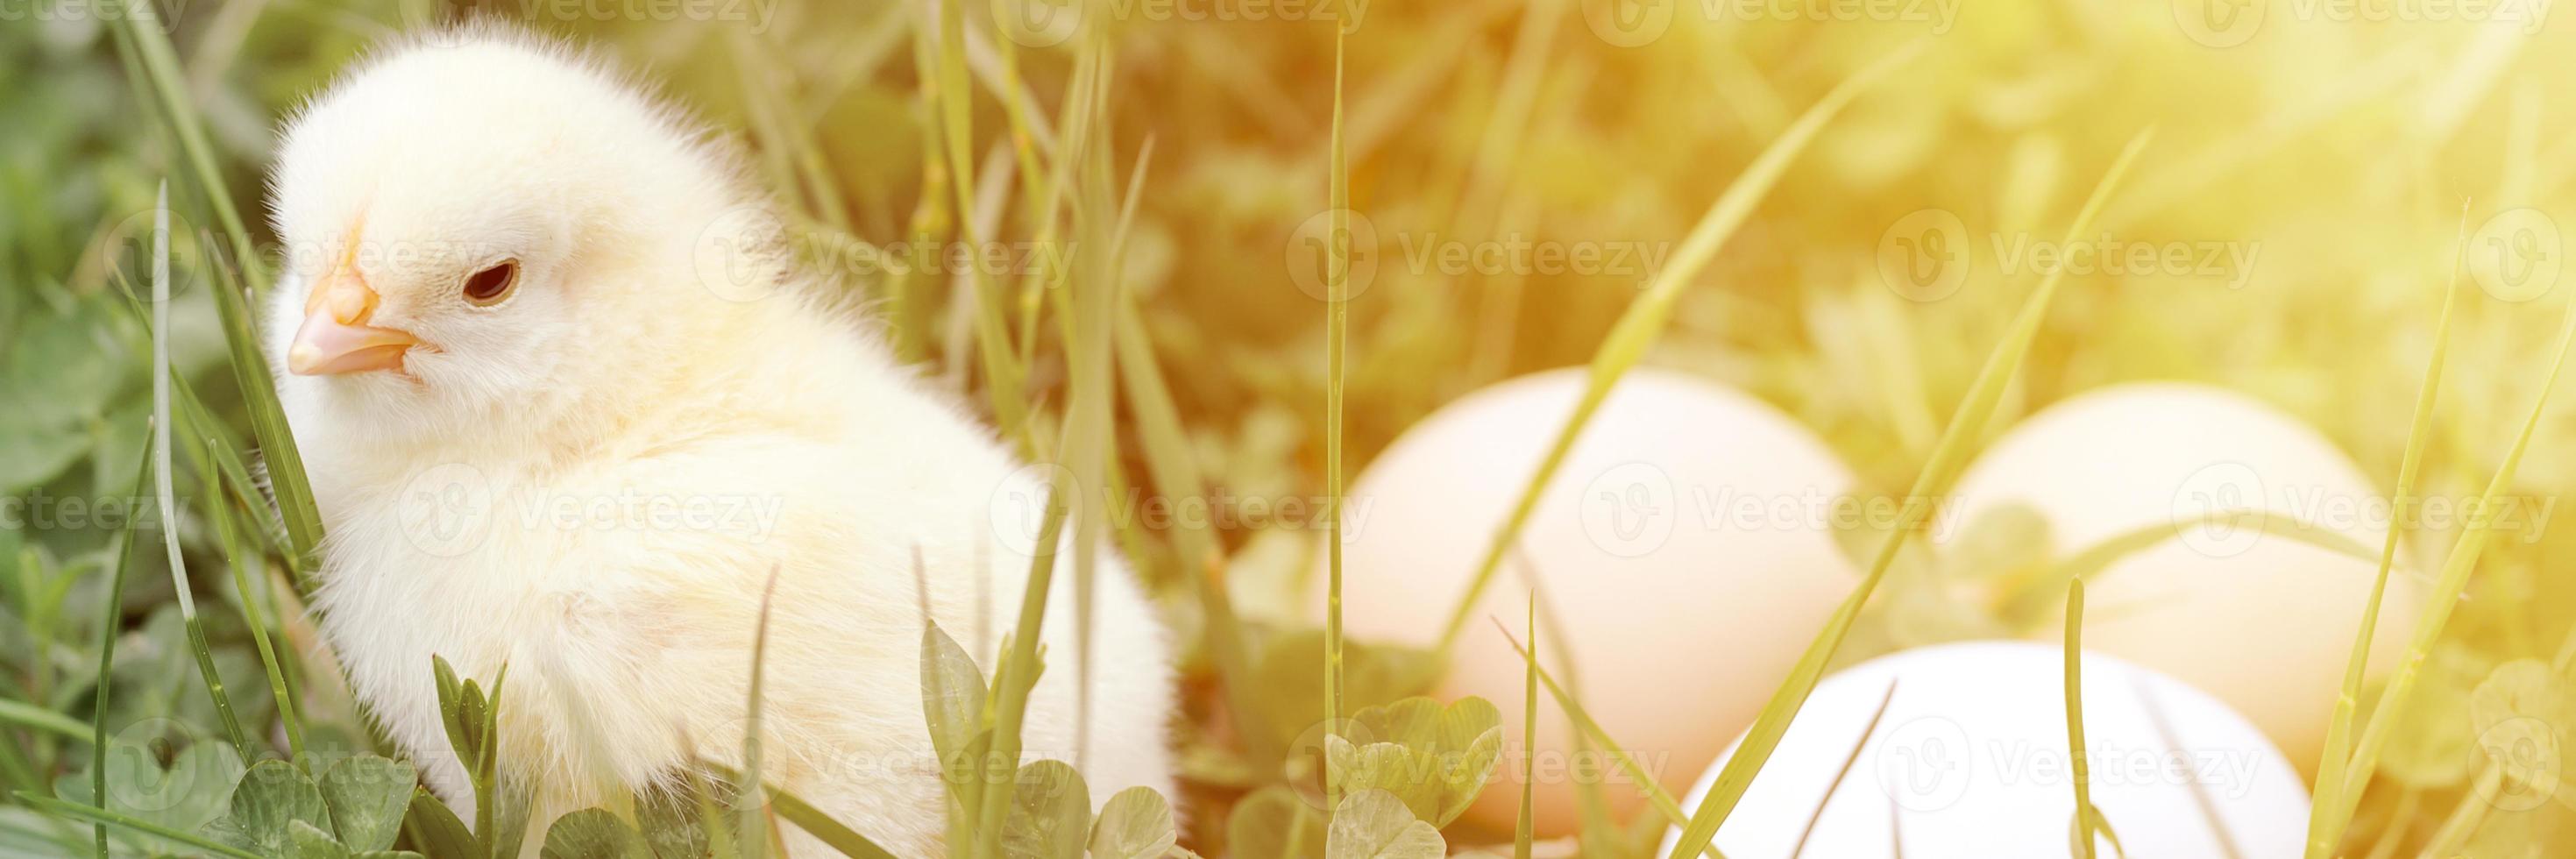 Cute little tiny newborn yellow baby chick and three chicken farmer eggs in the green grass photo